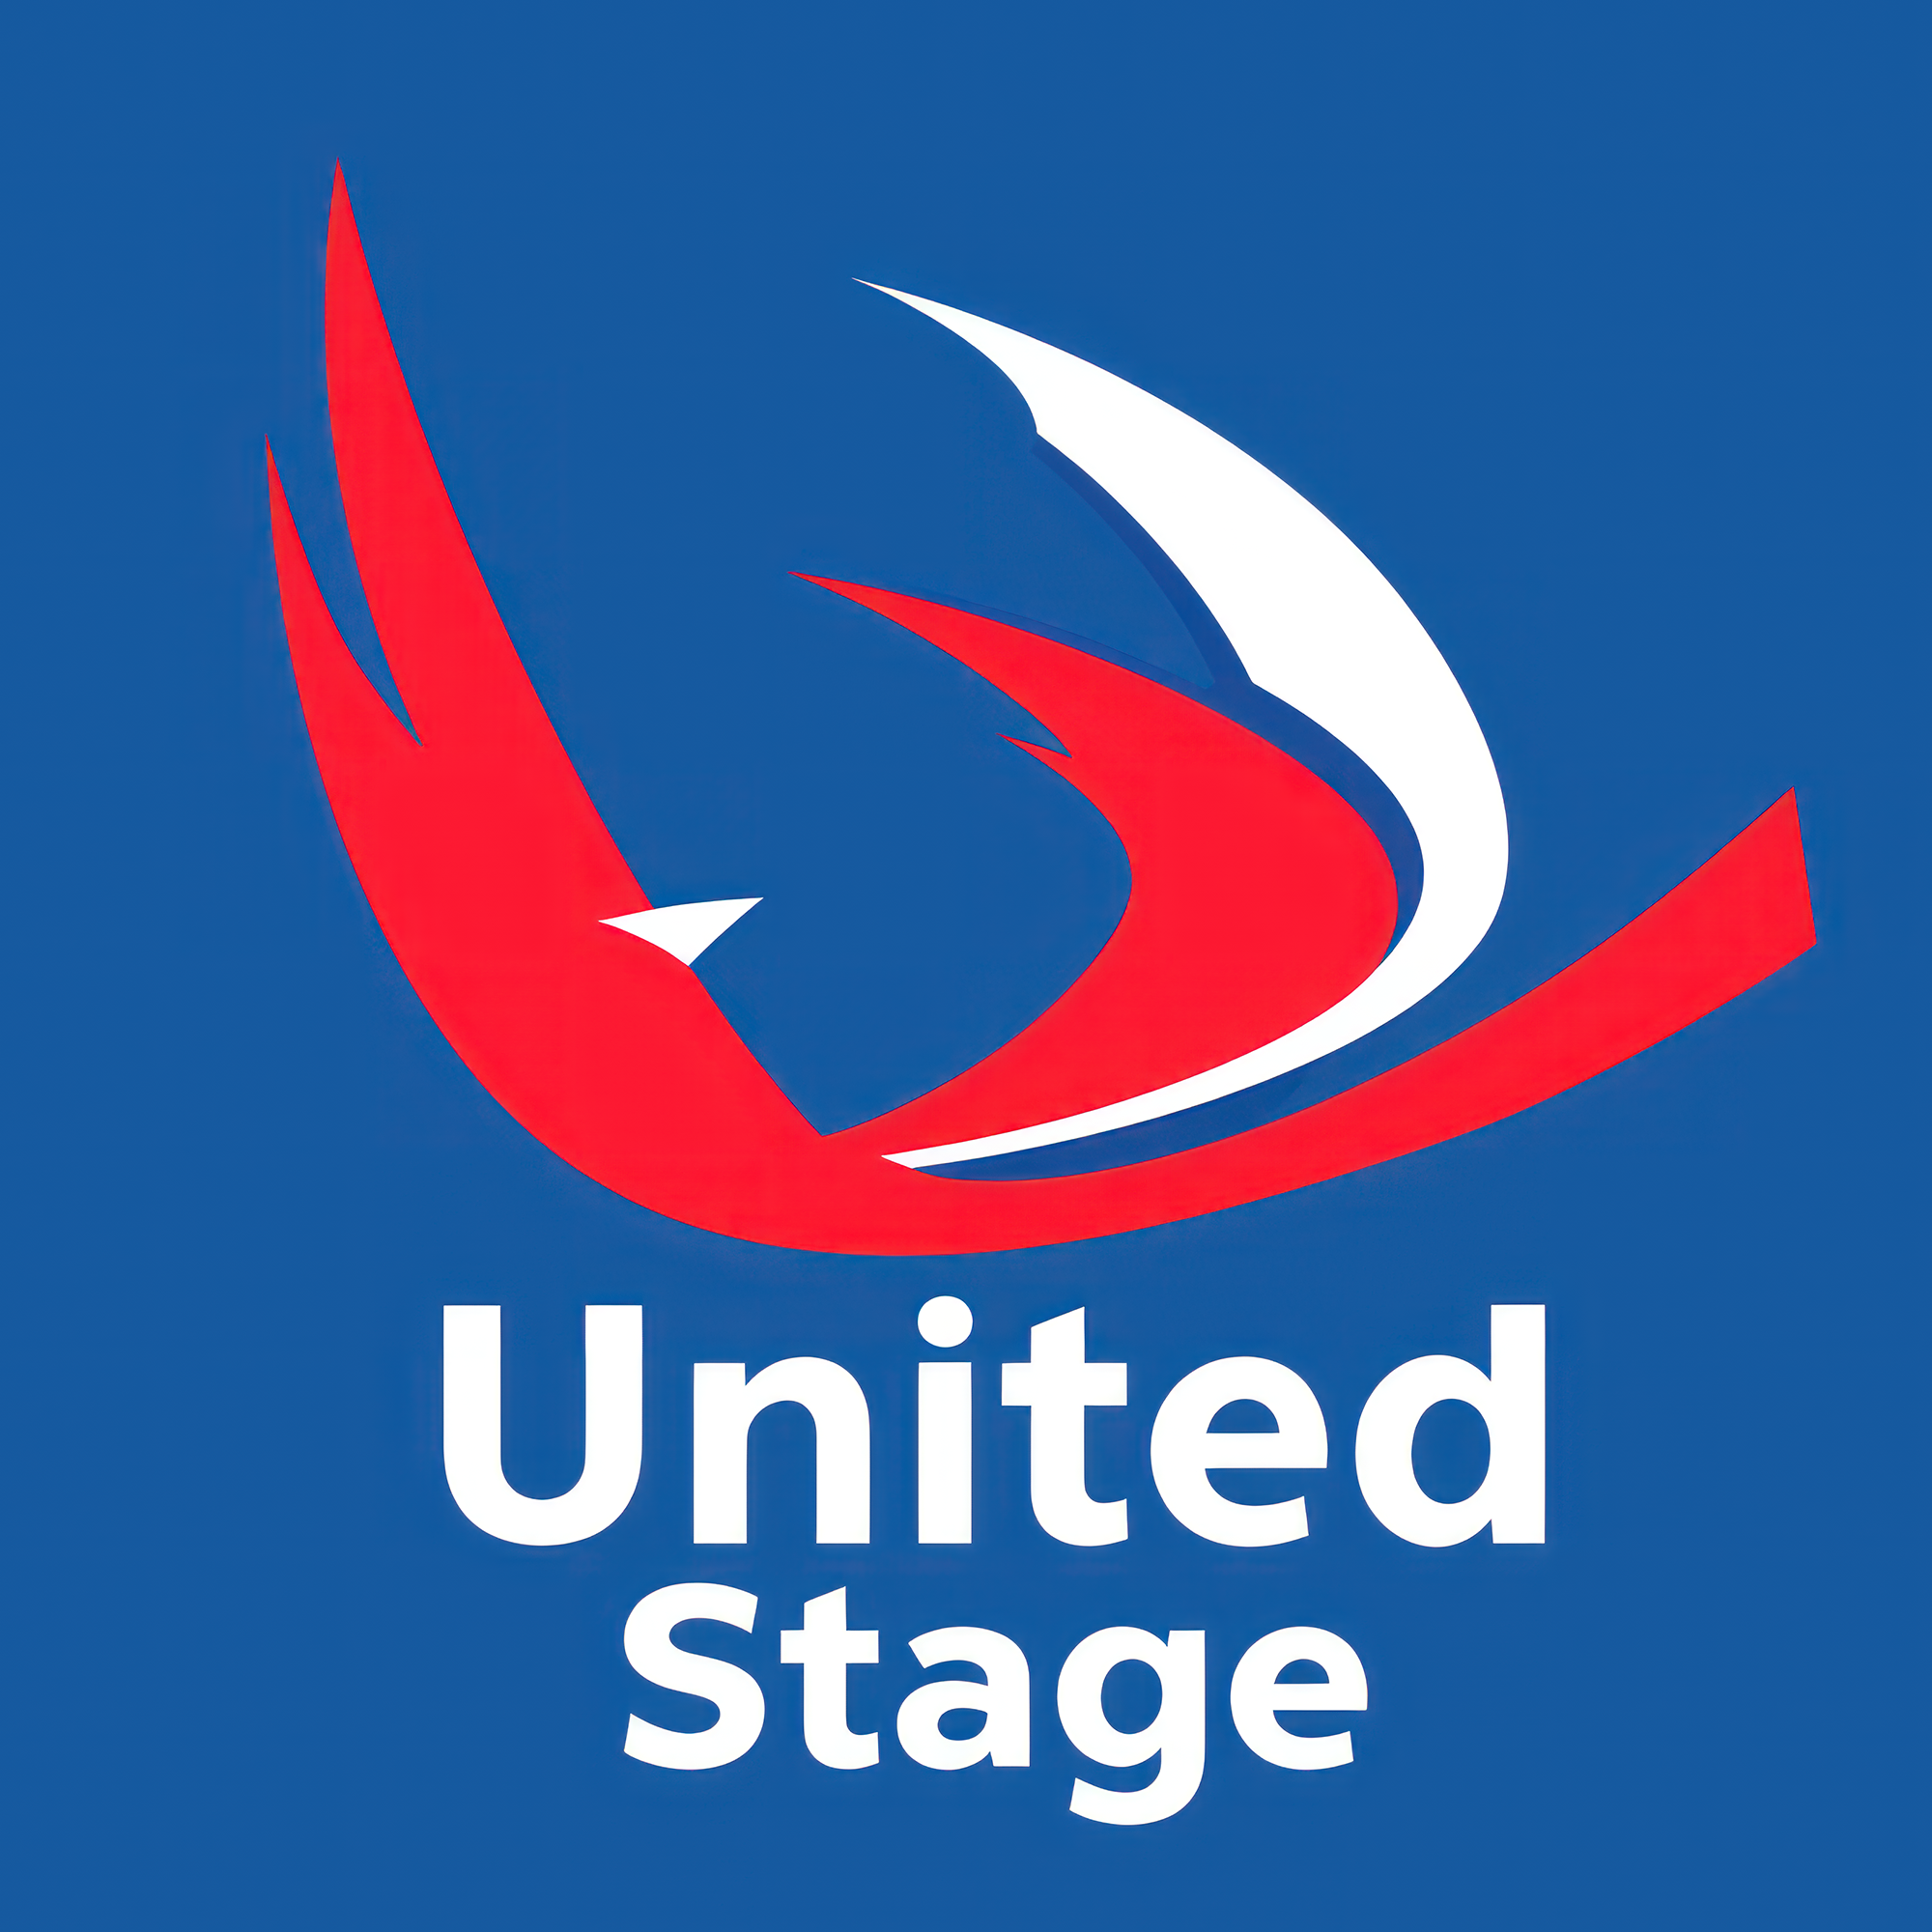 United Stage Wings Logo!